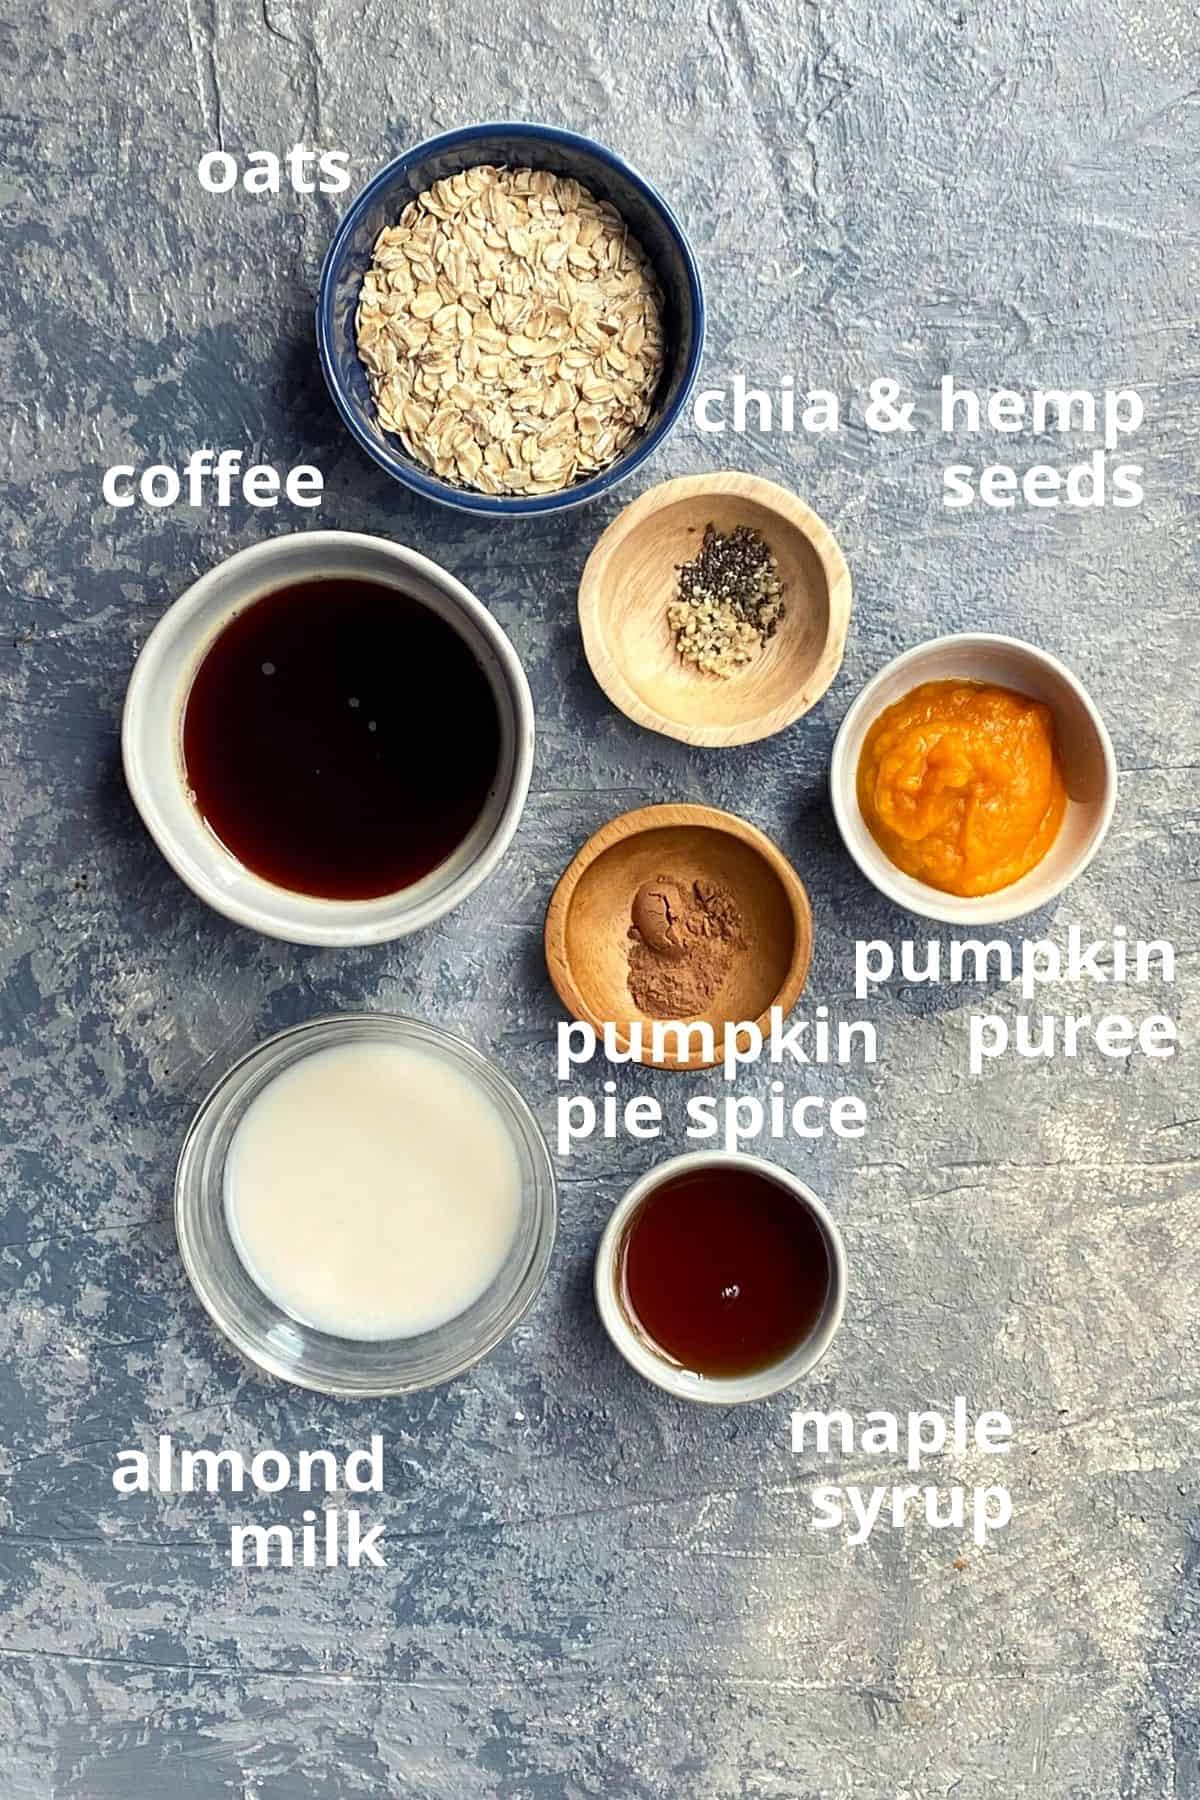 An overhead view of ingredients to make pumpkin spice latte overnight oats in little bowls; oats, chia & hemp seeds, coffee, pumpkin puree, pumpkin pie spice, almond milk, and maple syrup